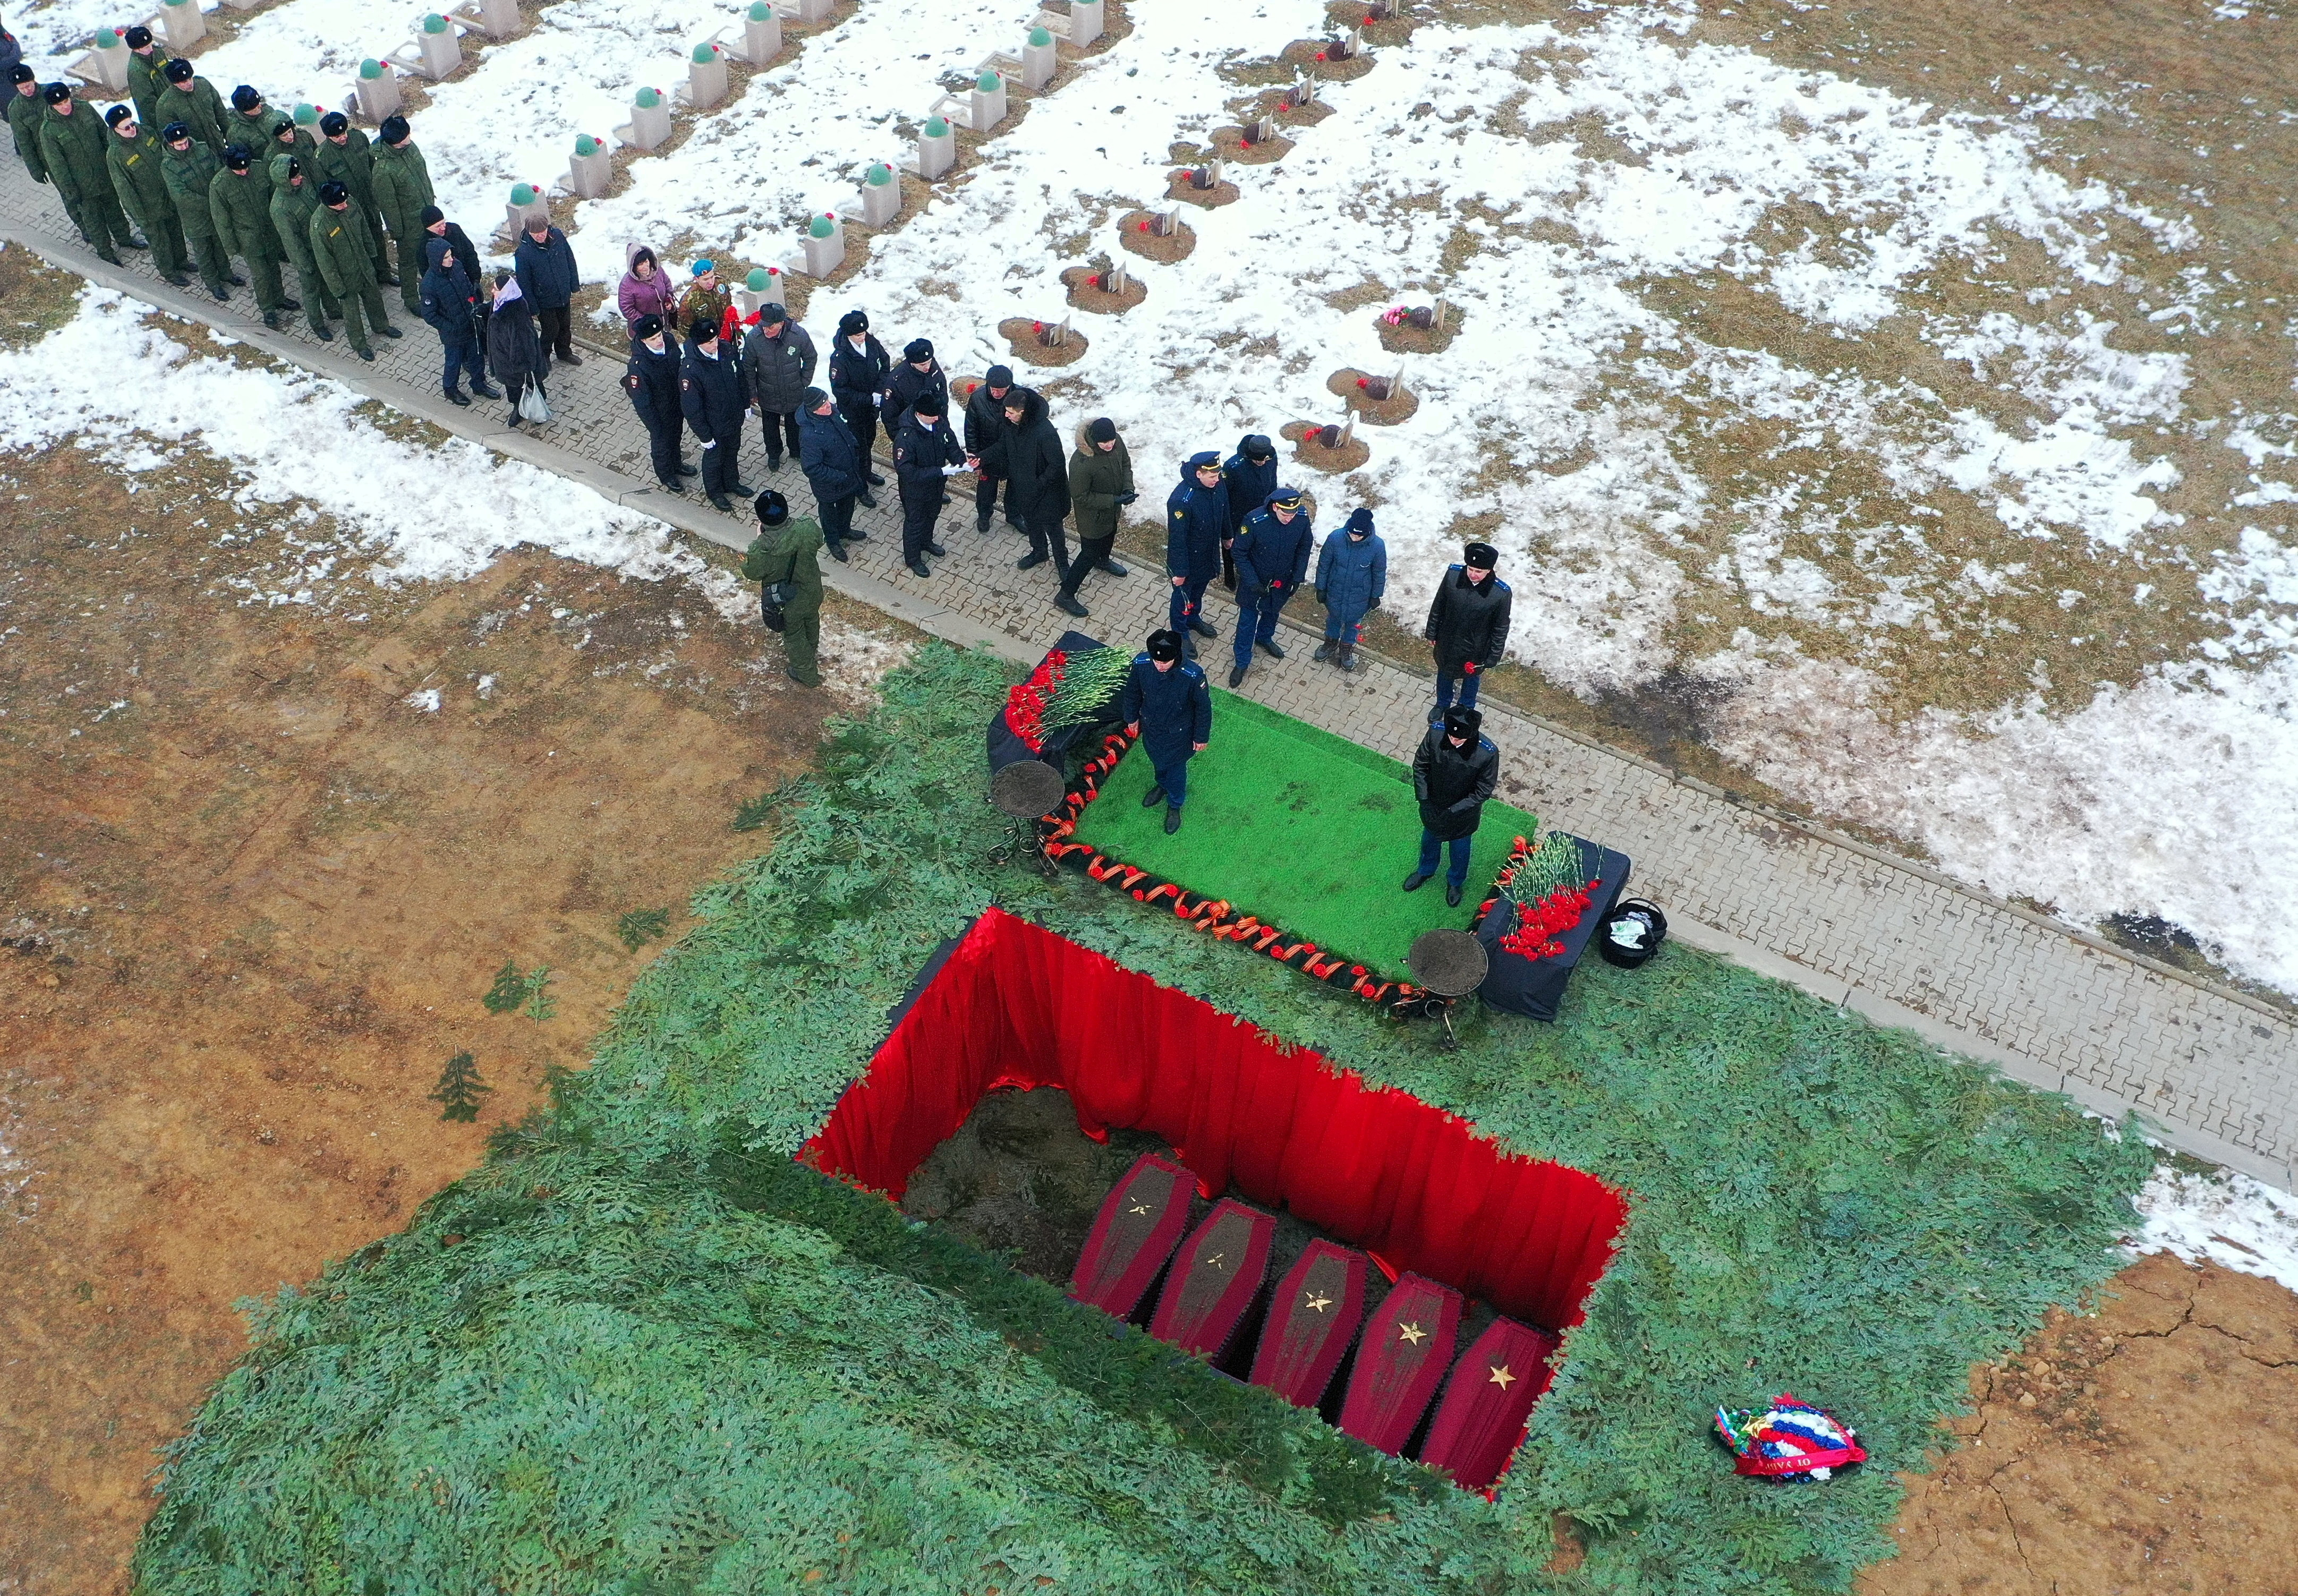 Participants attend a ceremony to rebury the remains of Red Army soldiers killed during World War Two in Volgograd region